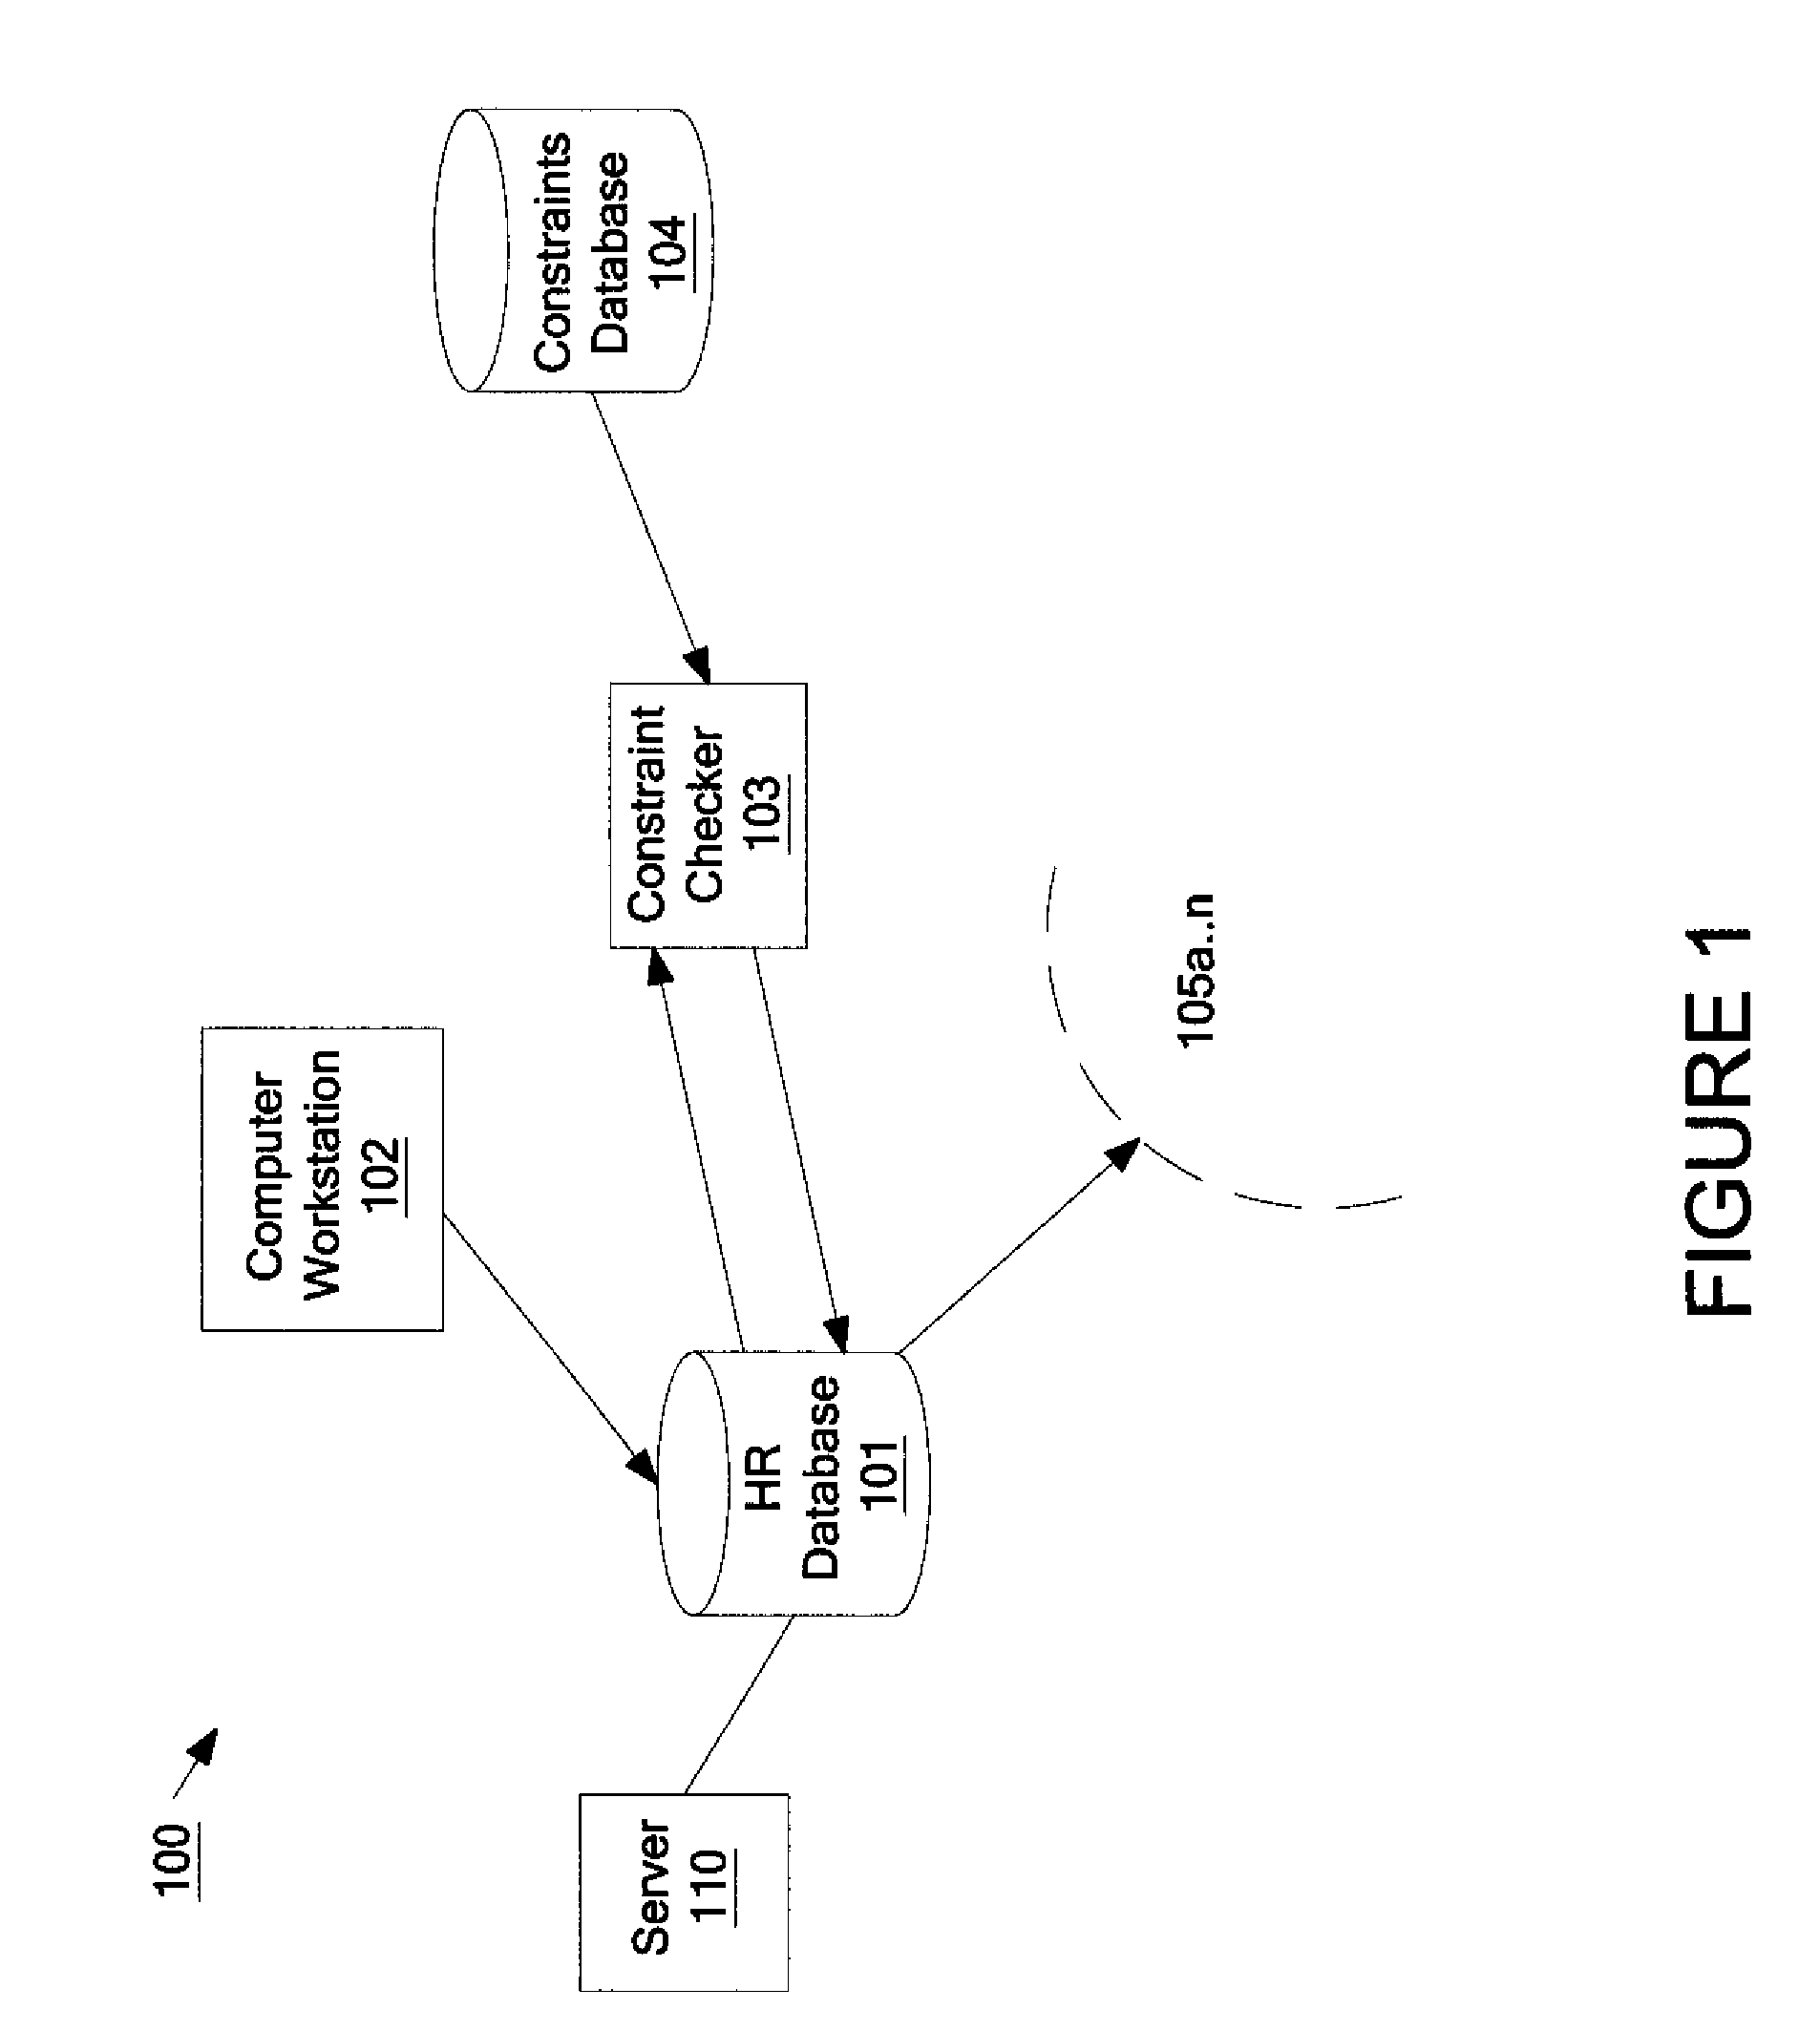 System and method for flexible handling of rules and regulations in labor hiring